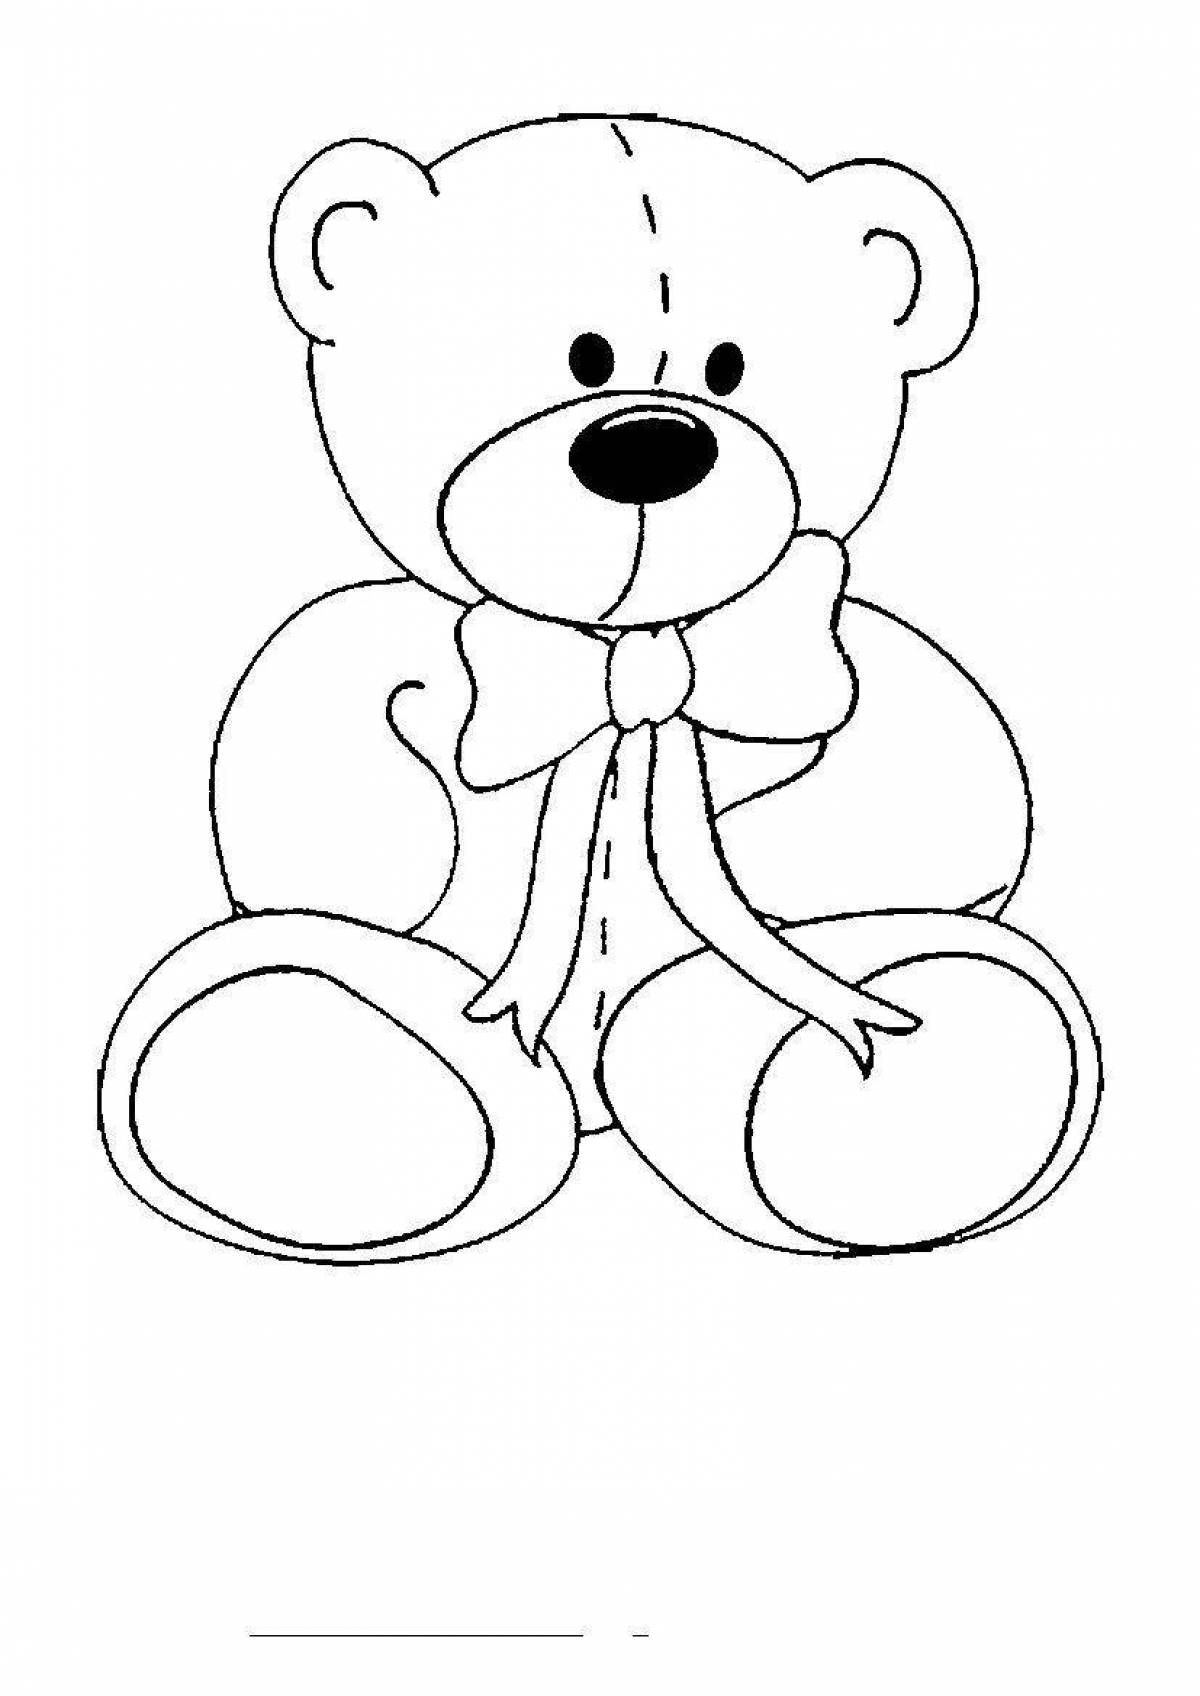 Cute teddy bear coloring for girls